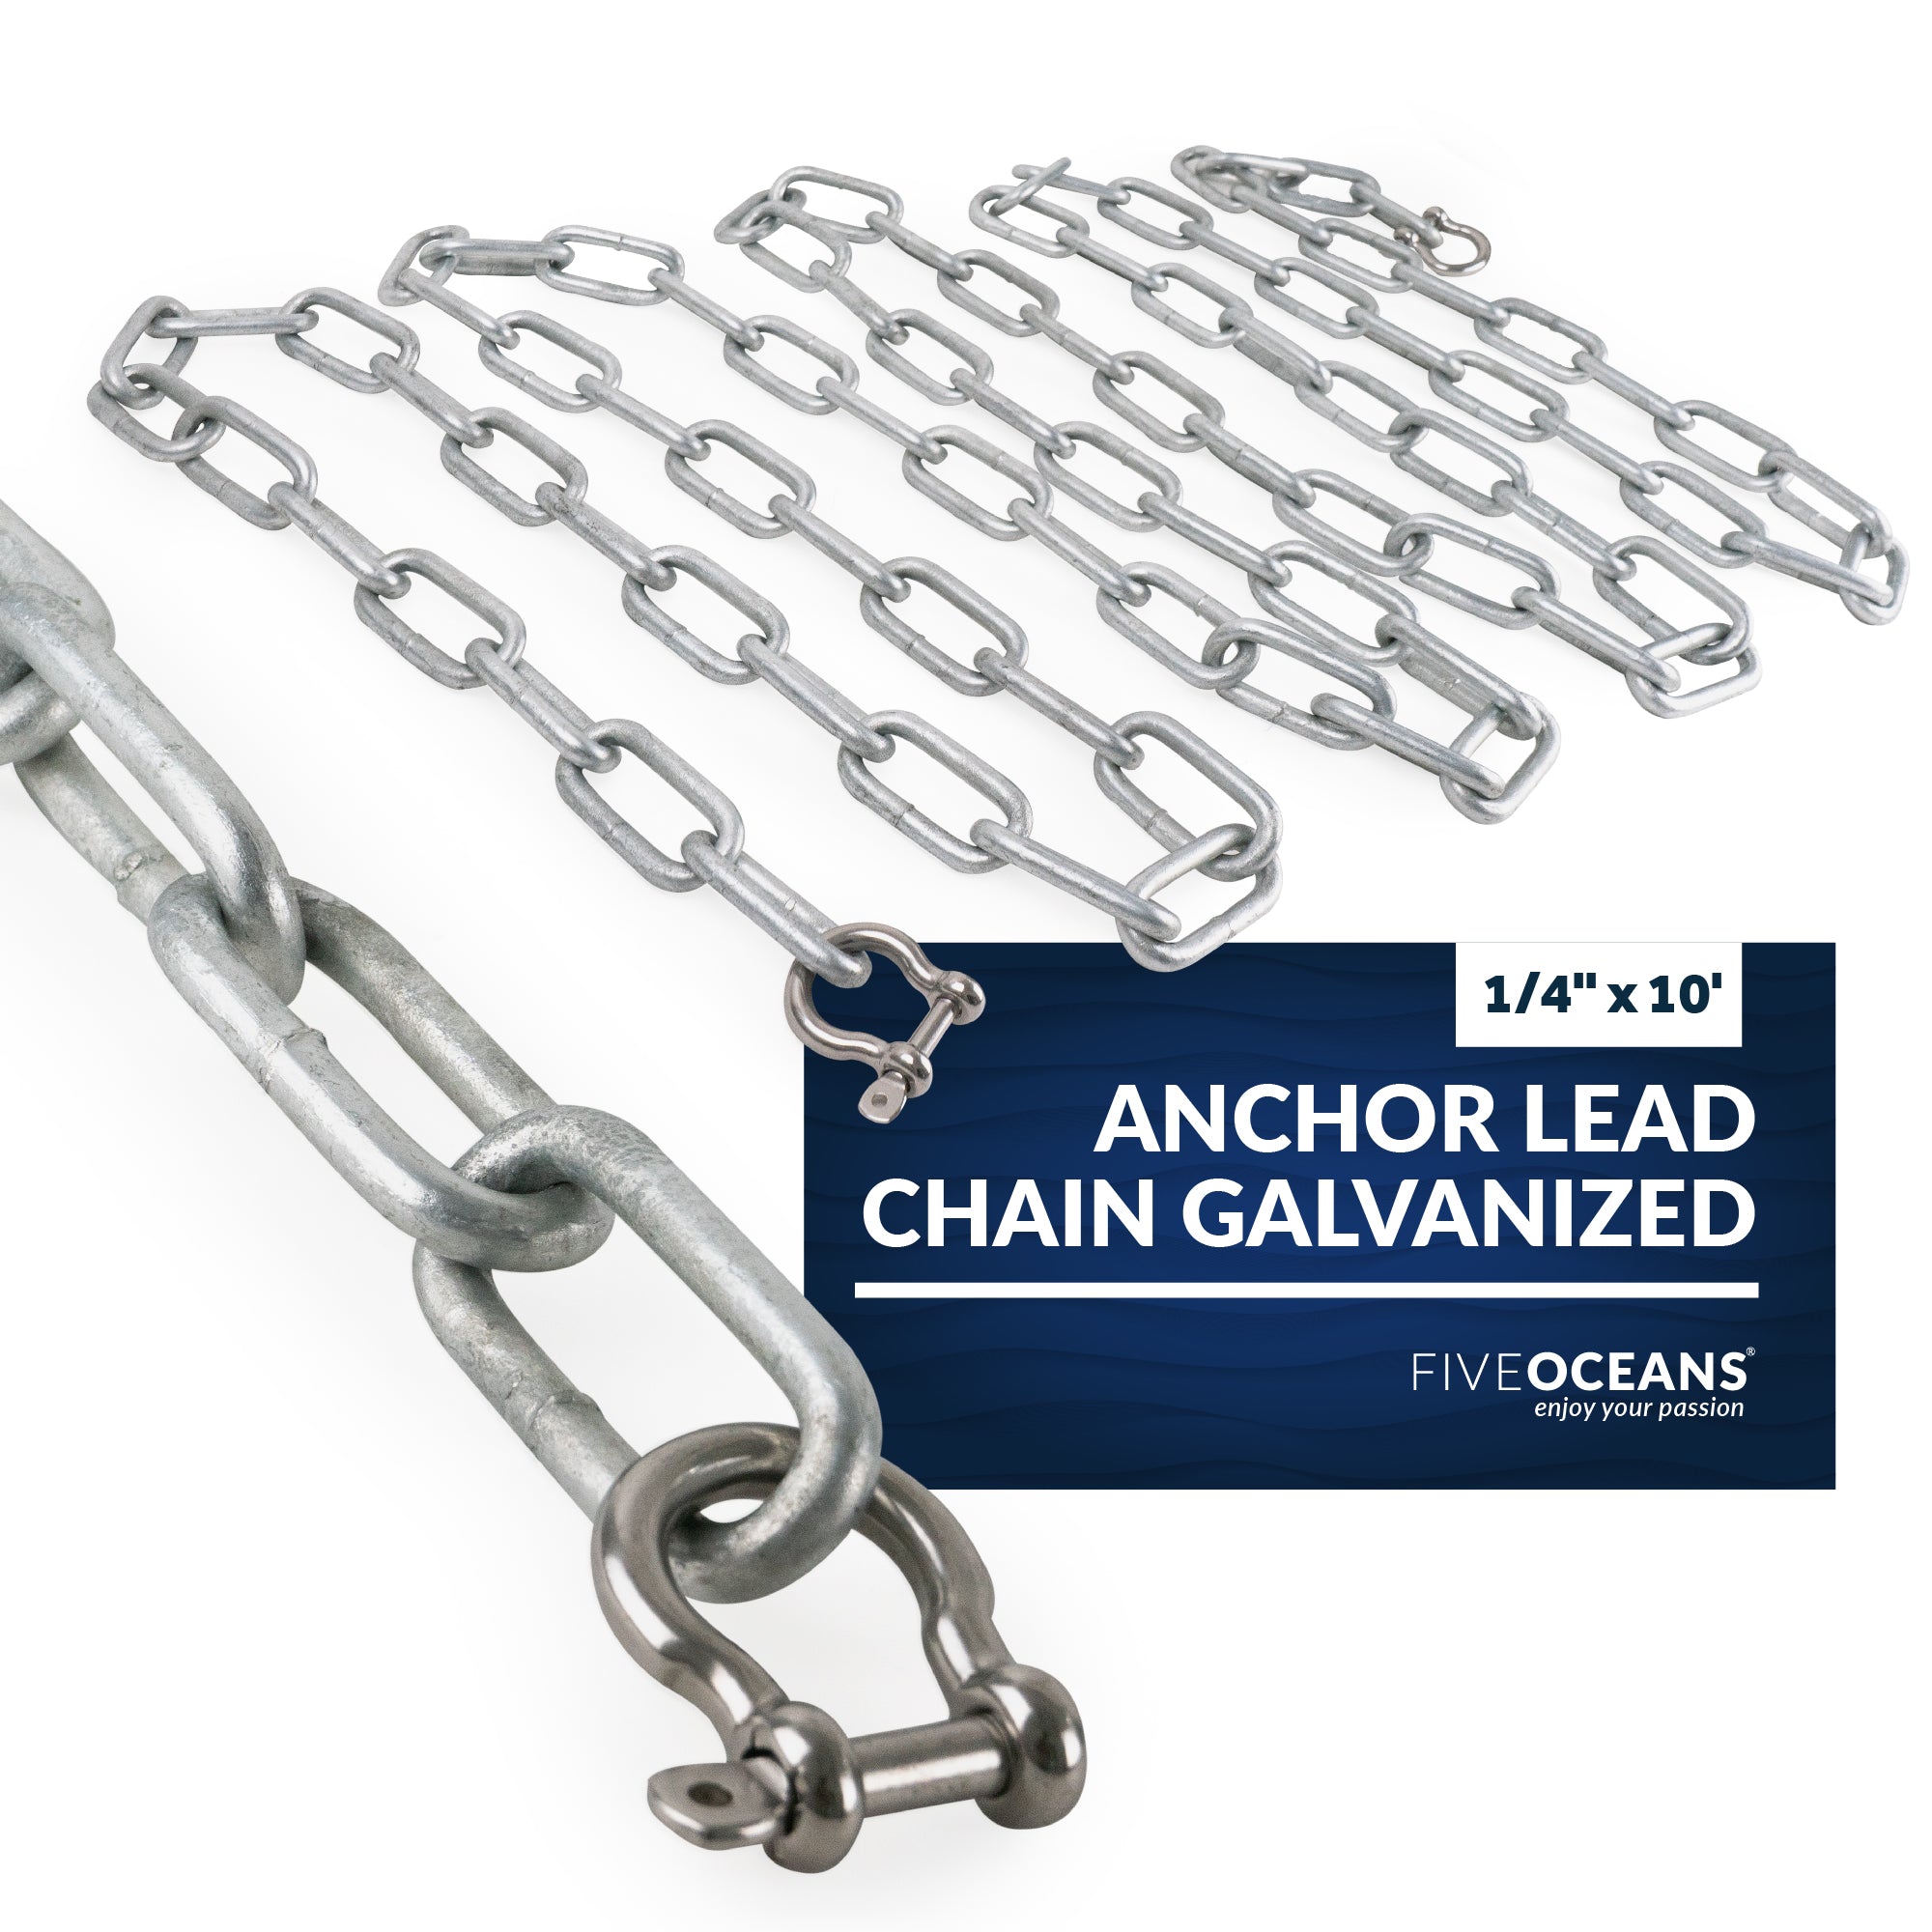 Boat Anchor Lead Chain with Shackles, 1/4" x 10' Hot-Dipped Galvanized with Shackles - FO4568-GN10